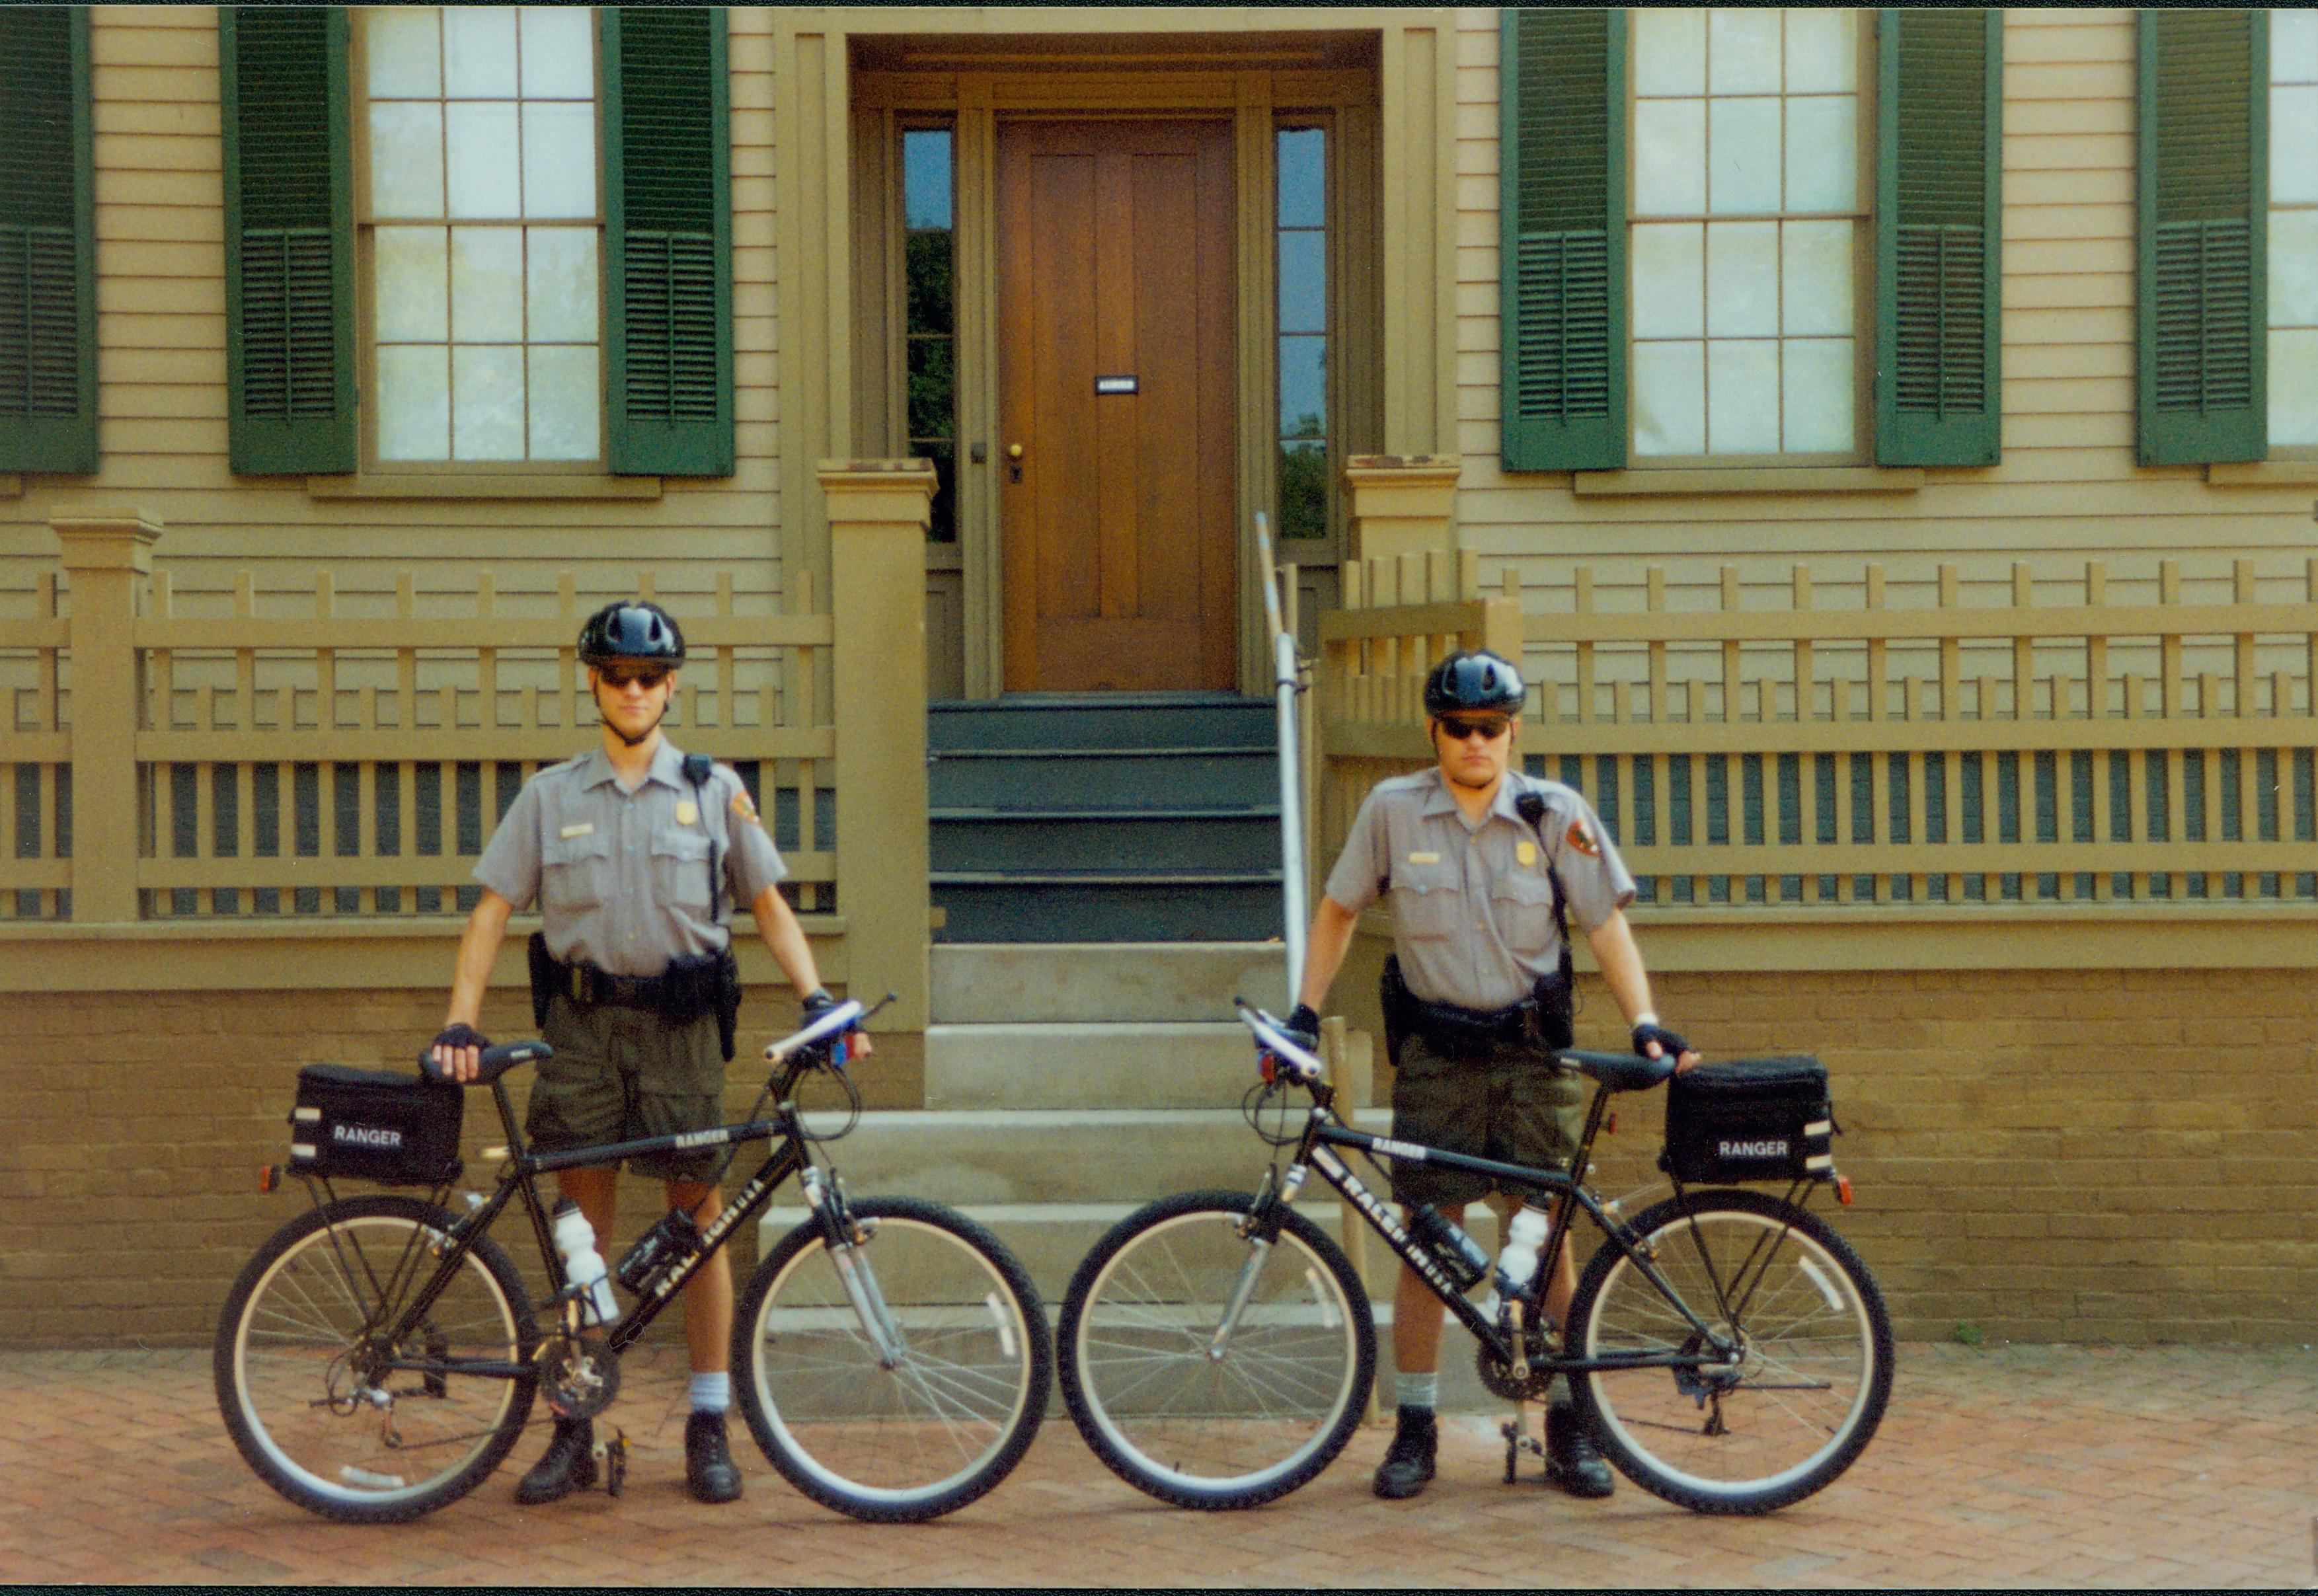 NA Law Enforcement, Bicycles